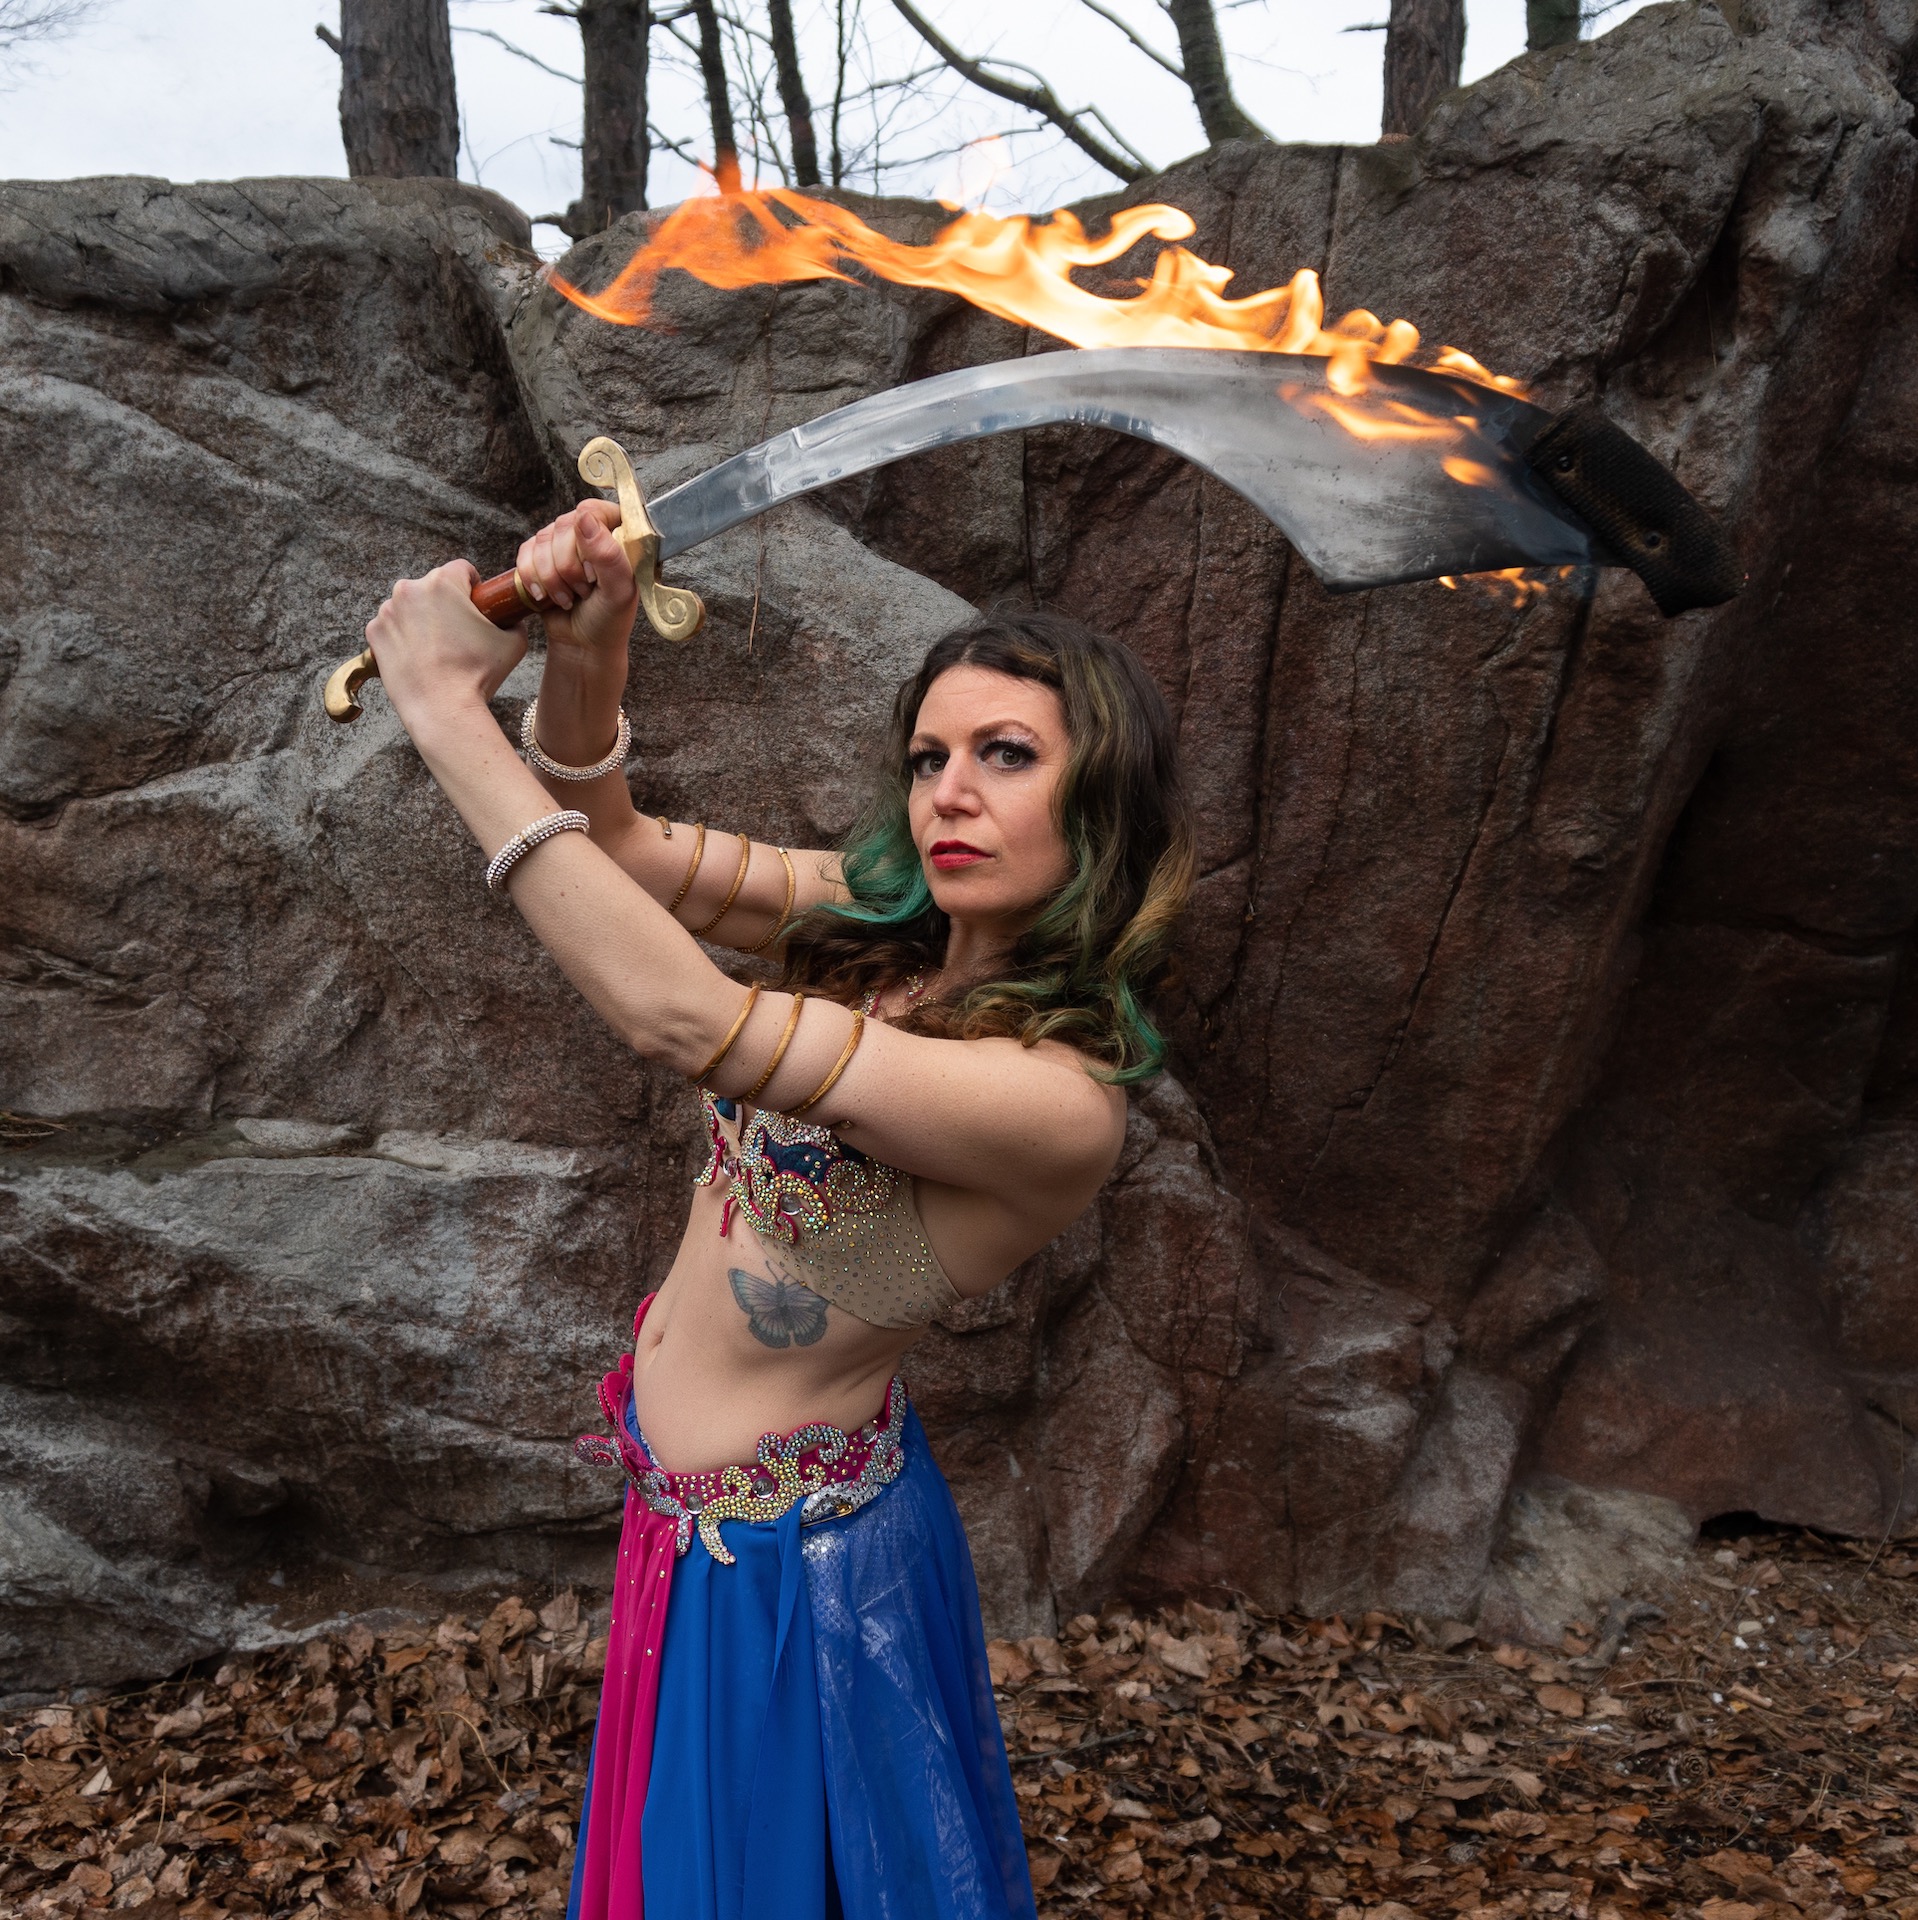 belly dancer with fire sword held aloft in the air